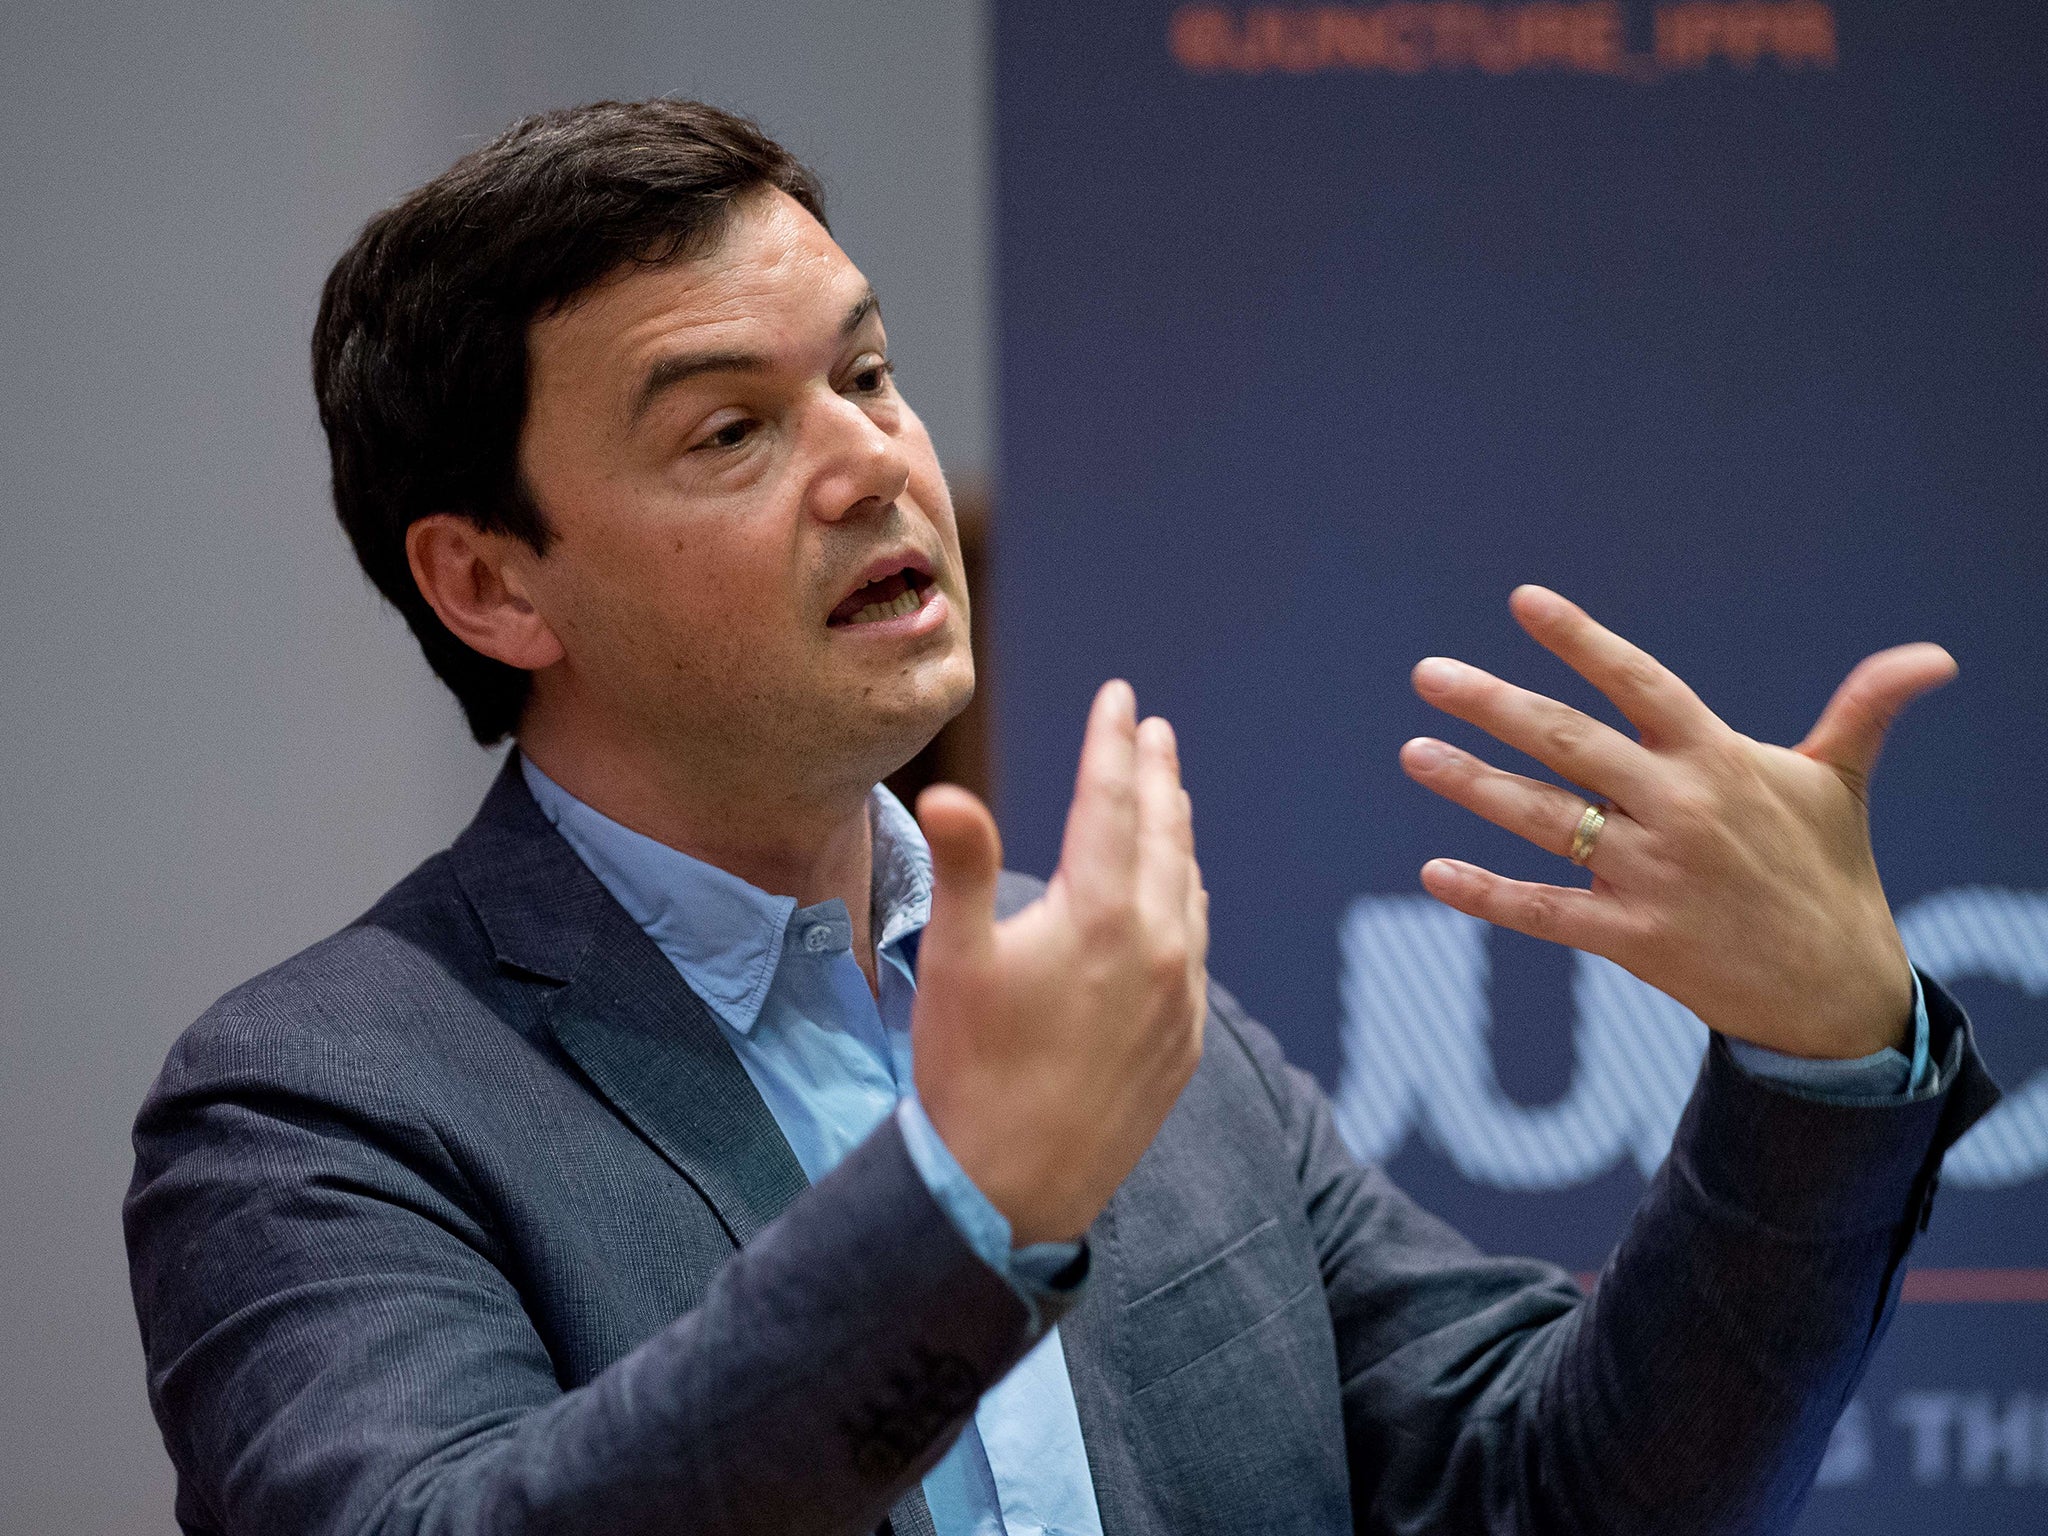 Thomas Piketty, the economist and best-selling author